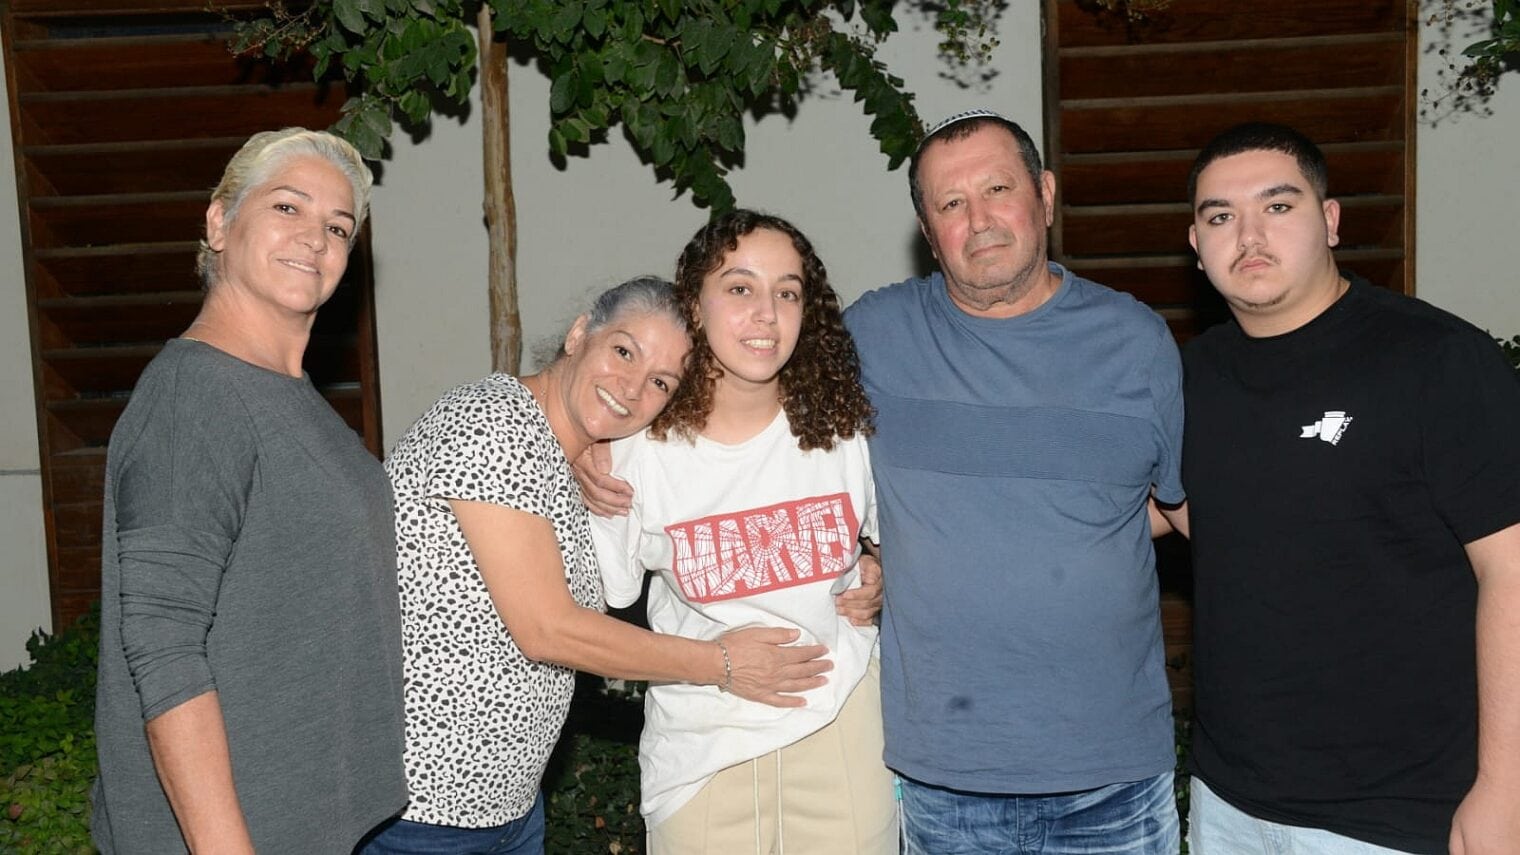 Private Ori Megidish (center) surrounded by her family after her rescue from Gaza on October 30th. Photo courtesy Shin Bet